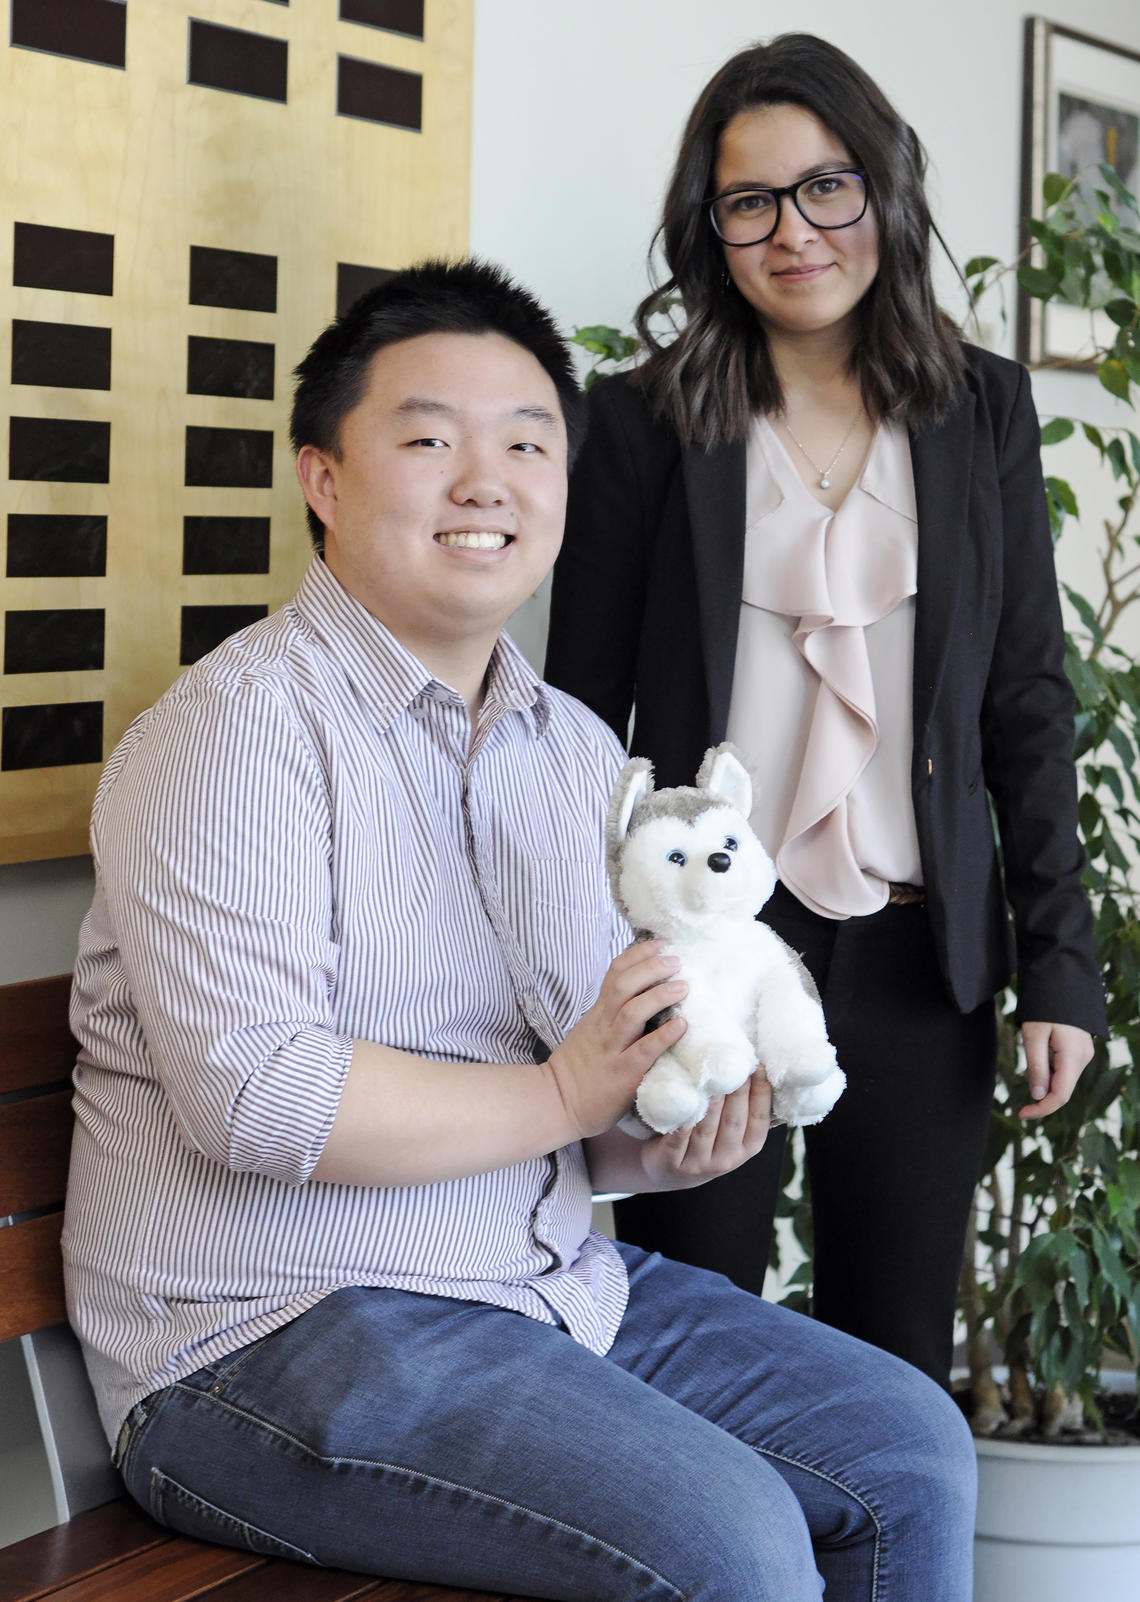 Pack members Wentao Li, left, and Manel Djebrouni with the group's Husky stuffed animal, which has become a symbol for the WolbPack. 